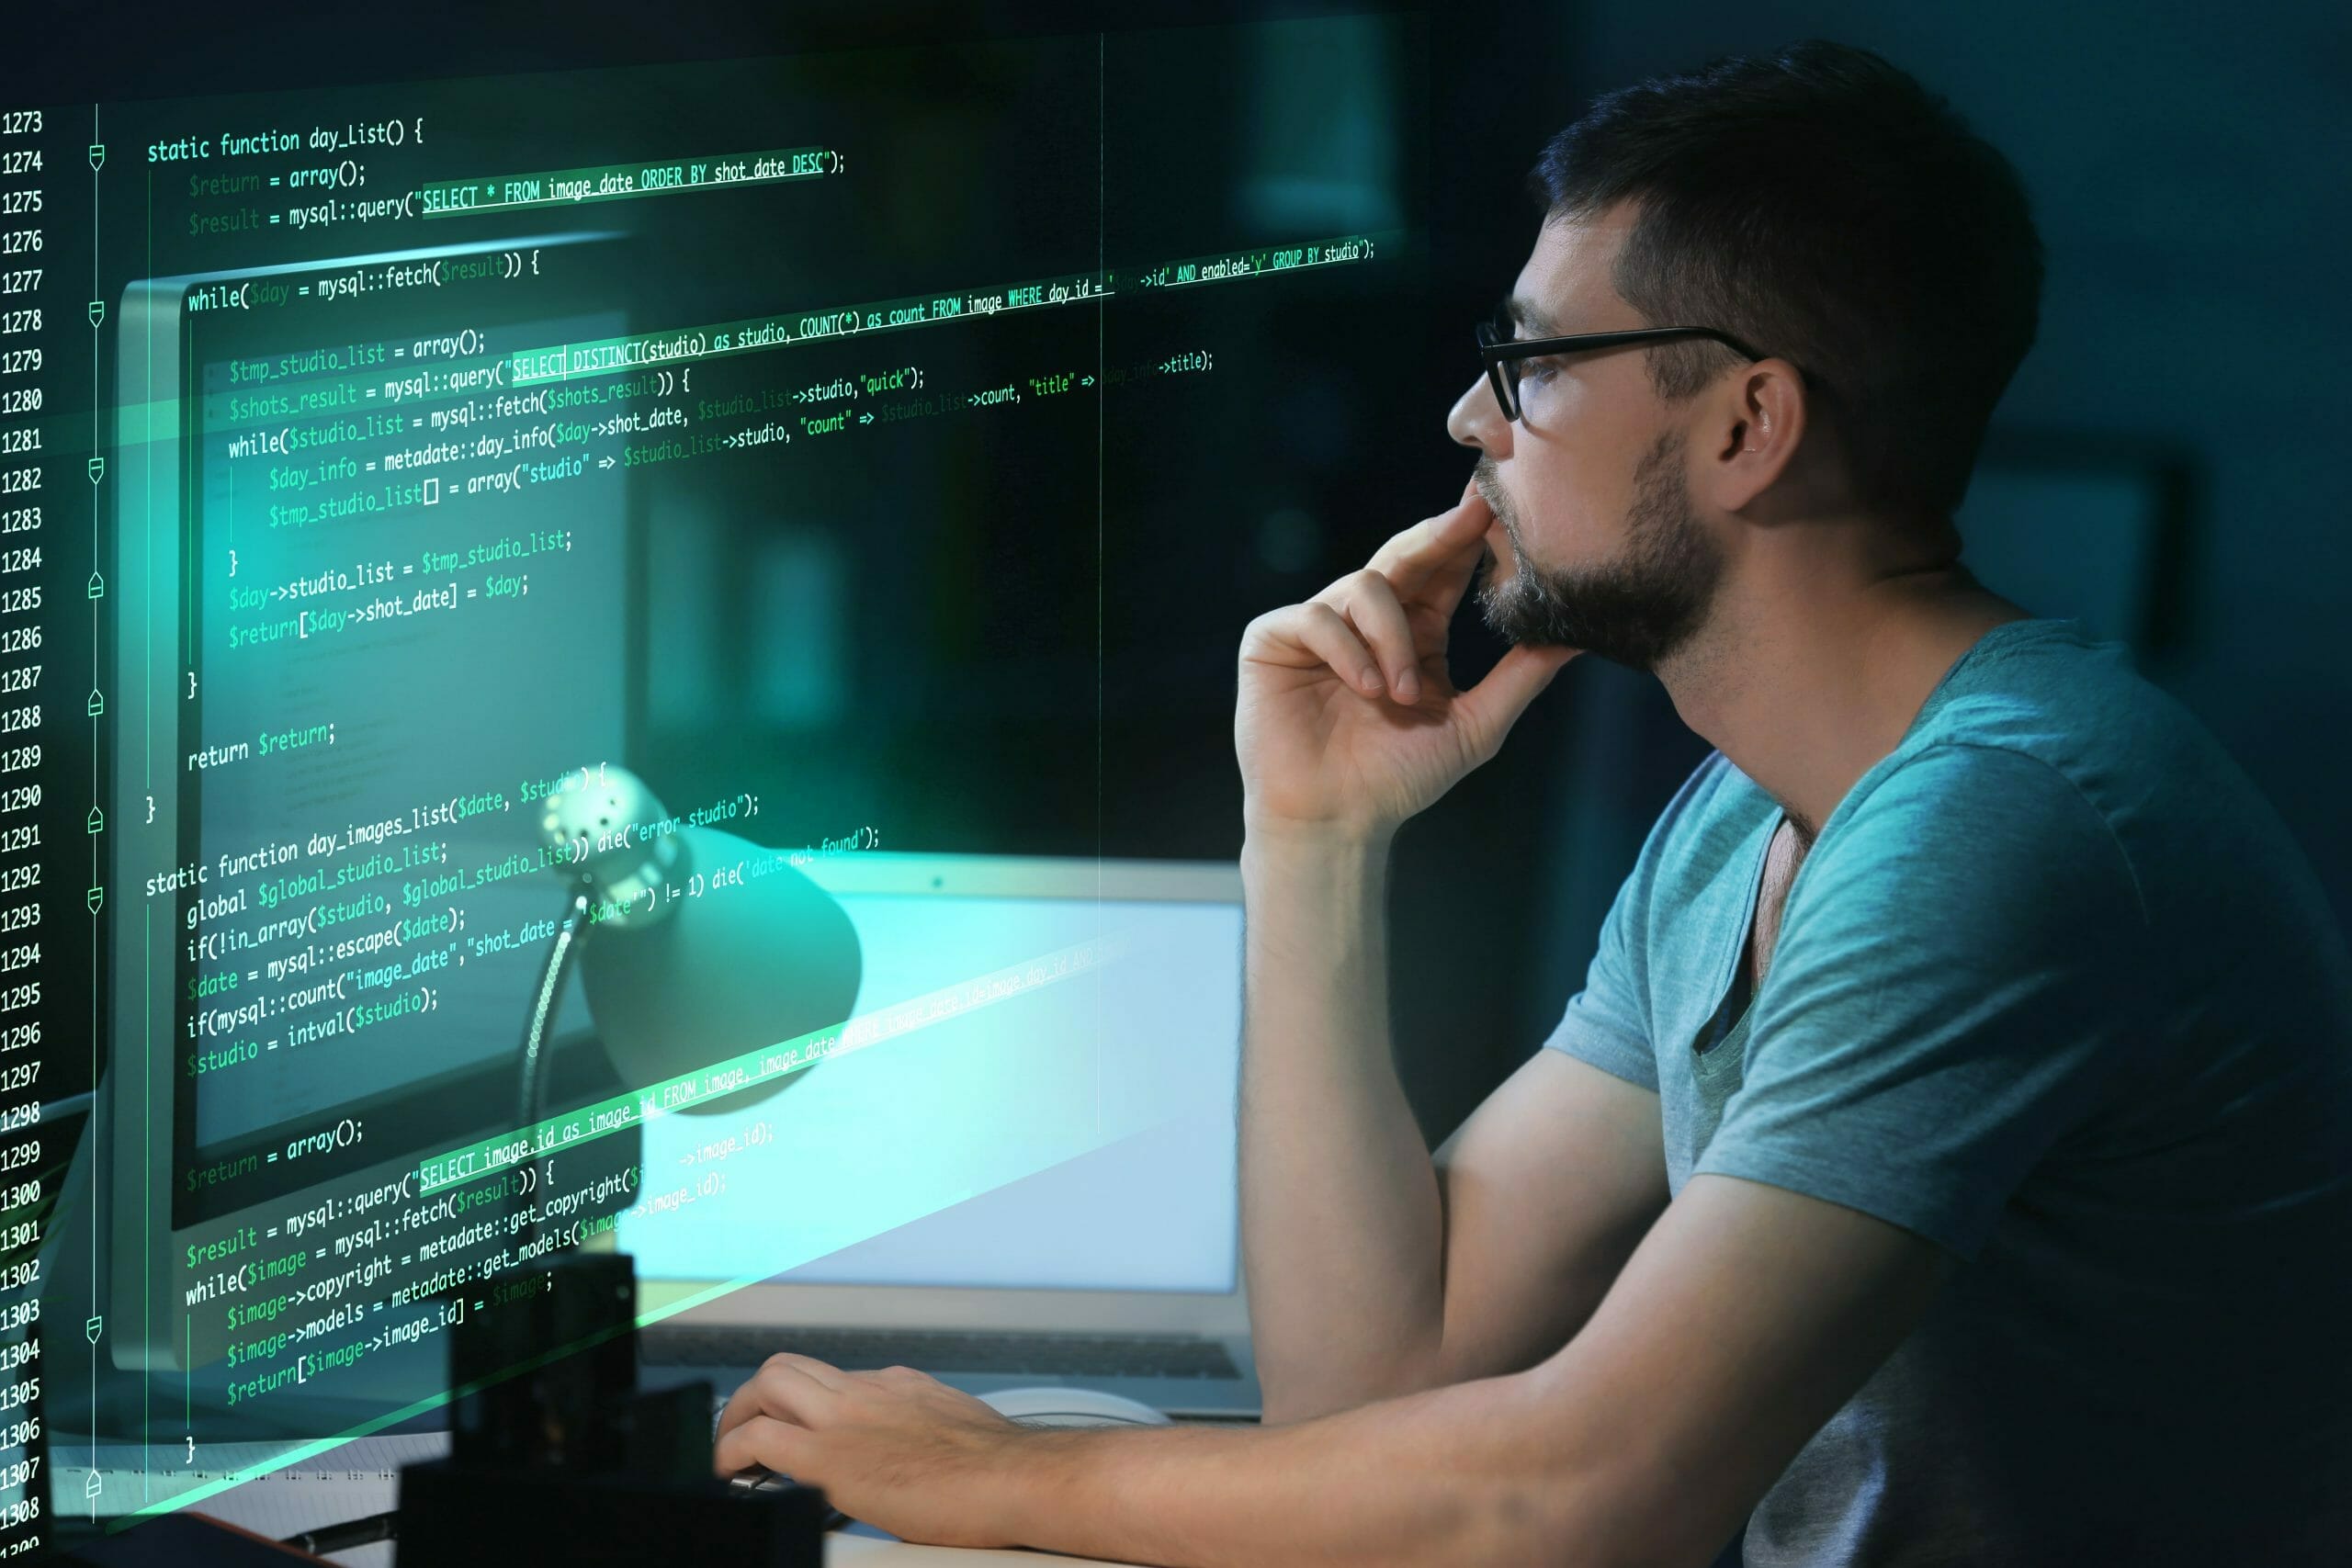 Programmer staring thoughtfully at screen